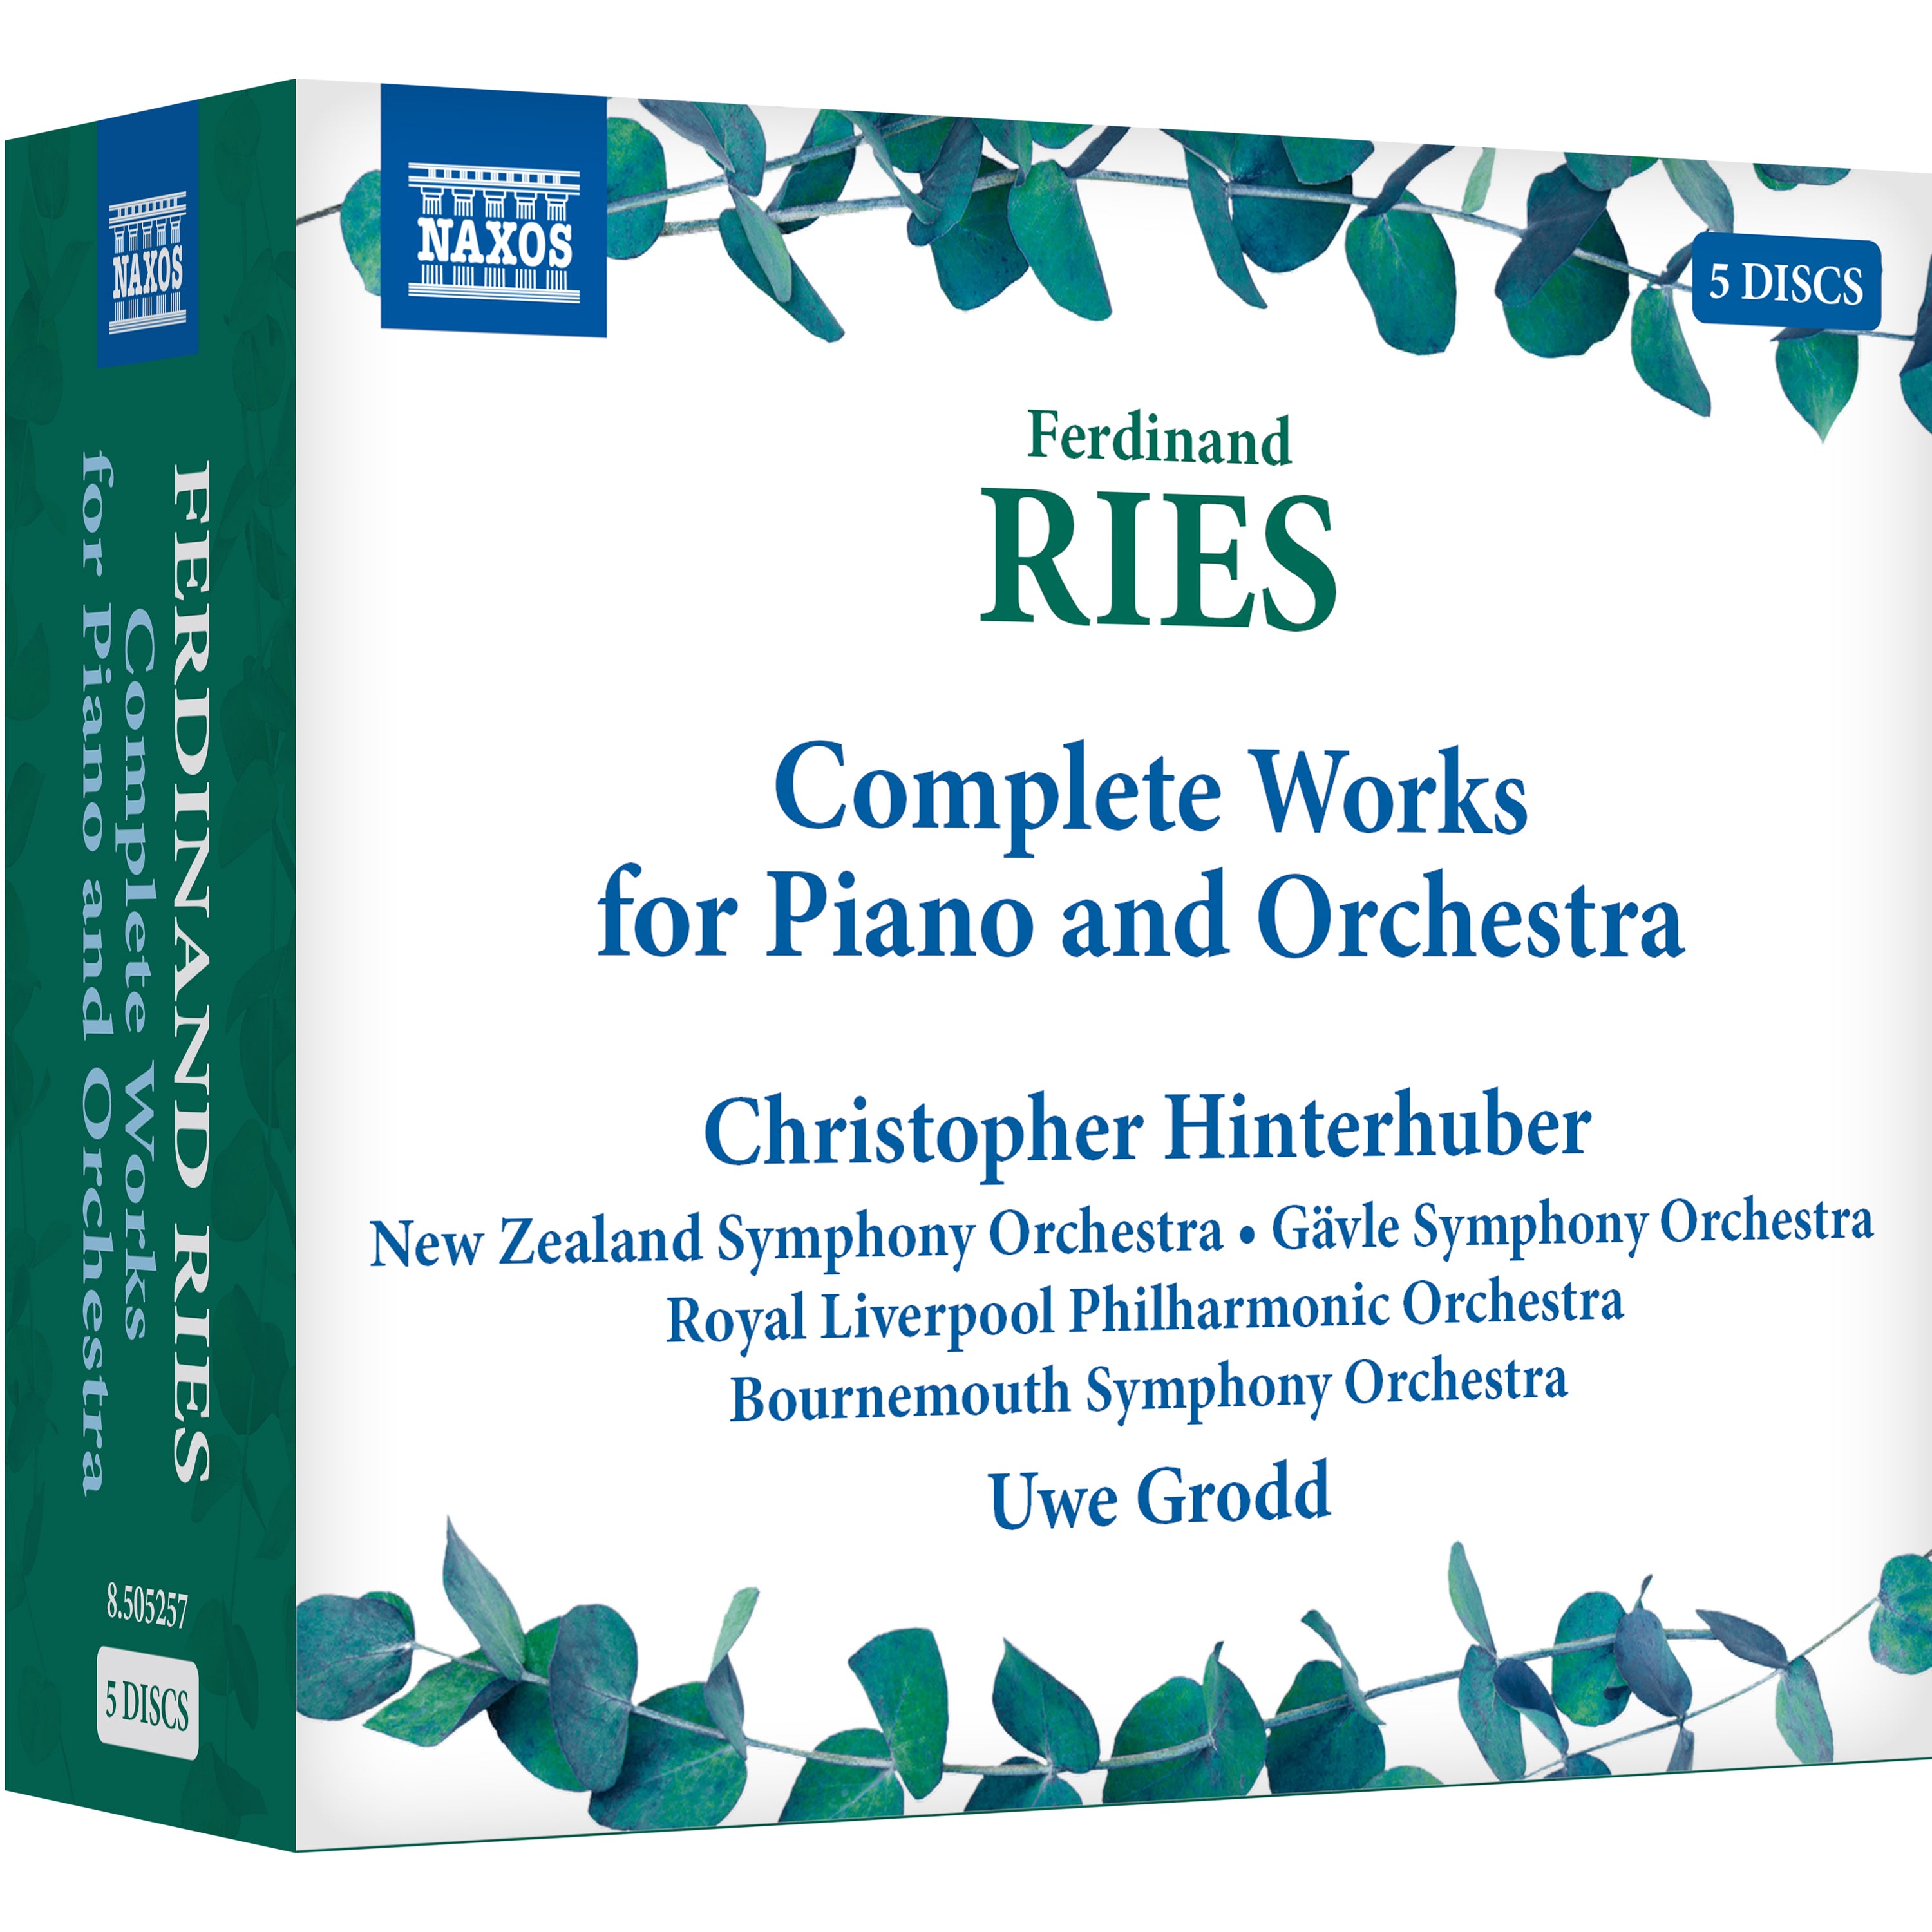 Ries<br>Complete Works for Piano and Orchestra